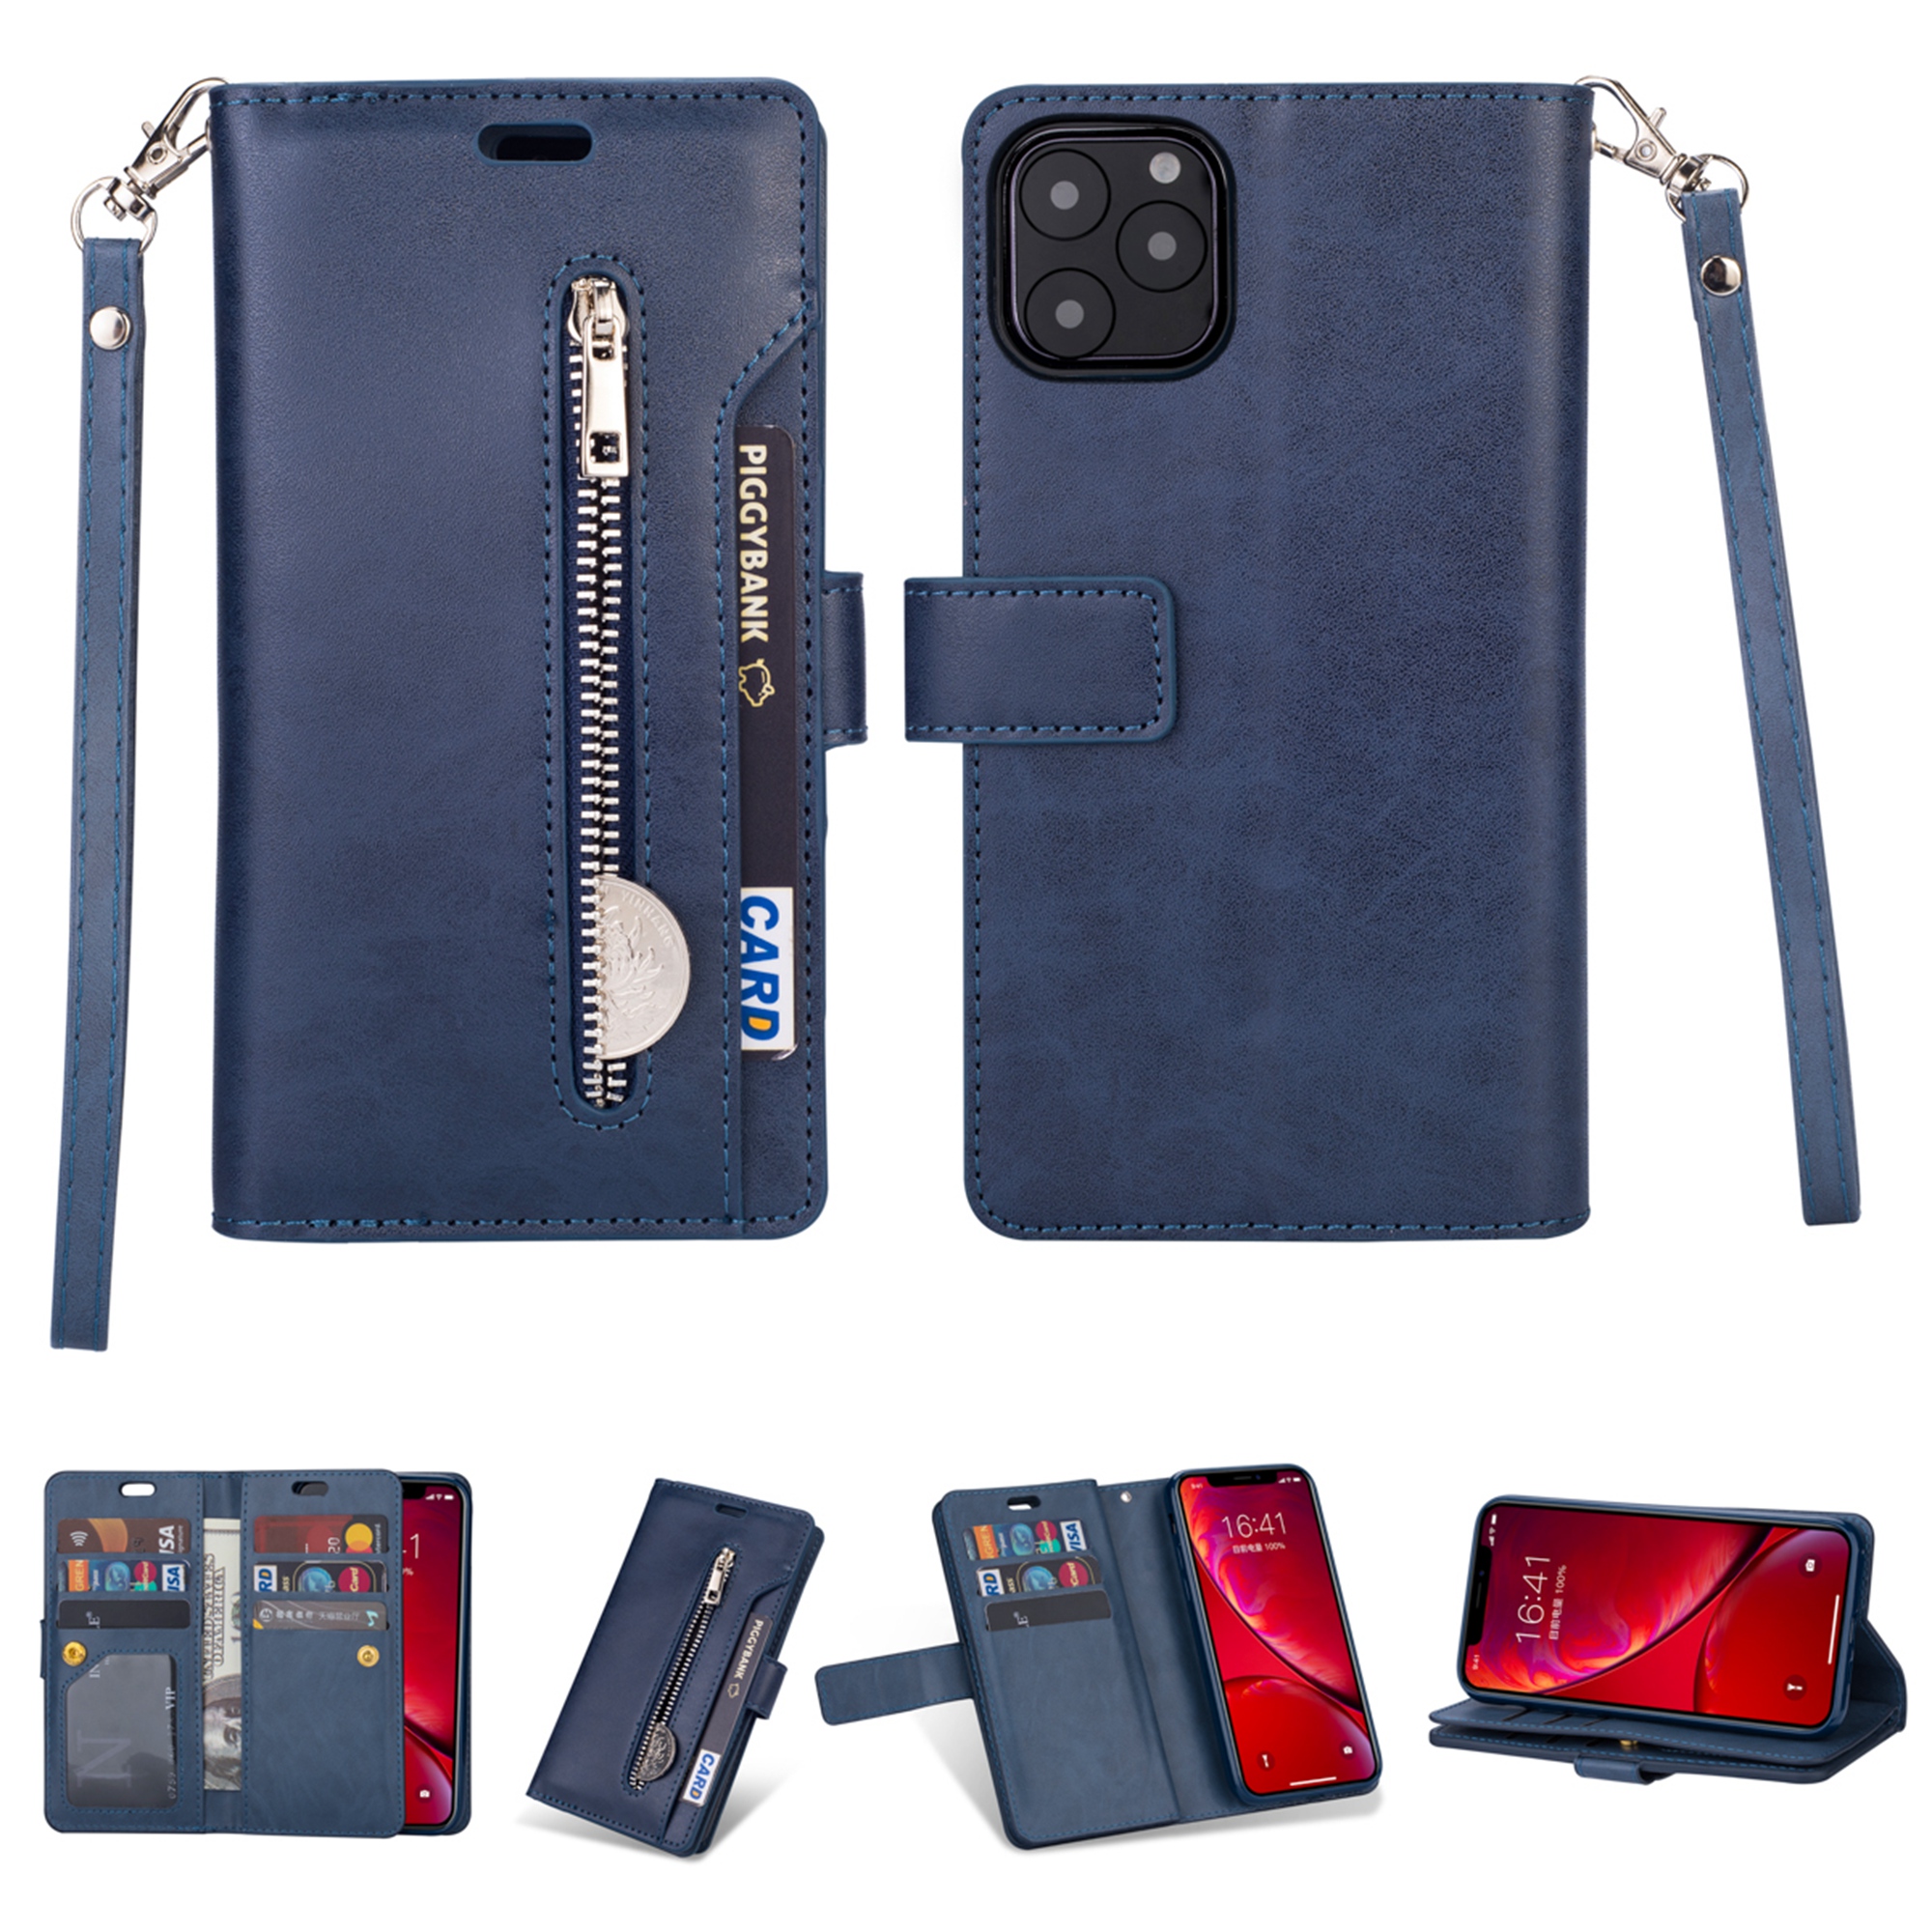 iPhone 11 Pro Max 6.5 inch Wallet Case, Dteck 9 Card Slots Premium Leather Zipper Purse case Flip Kickstand Folio Magnetic with Wrist Strap Credit Cash Cover For Apple iPhone 11 Pro Max, Blue - image 1 of 7